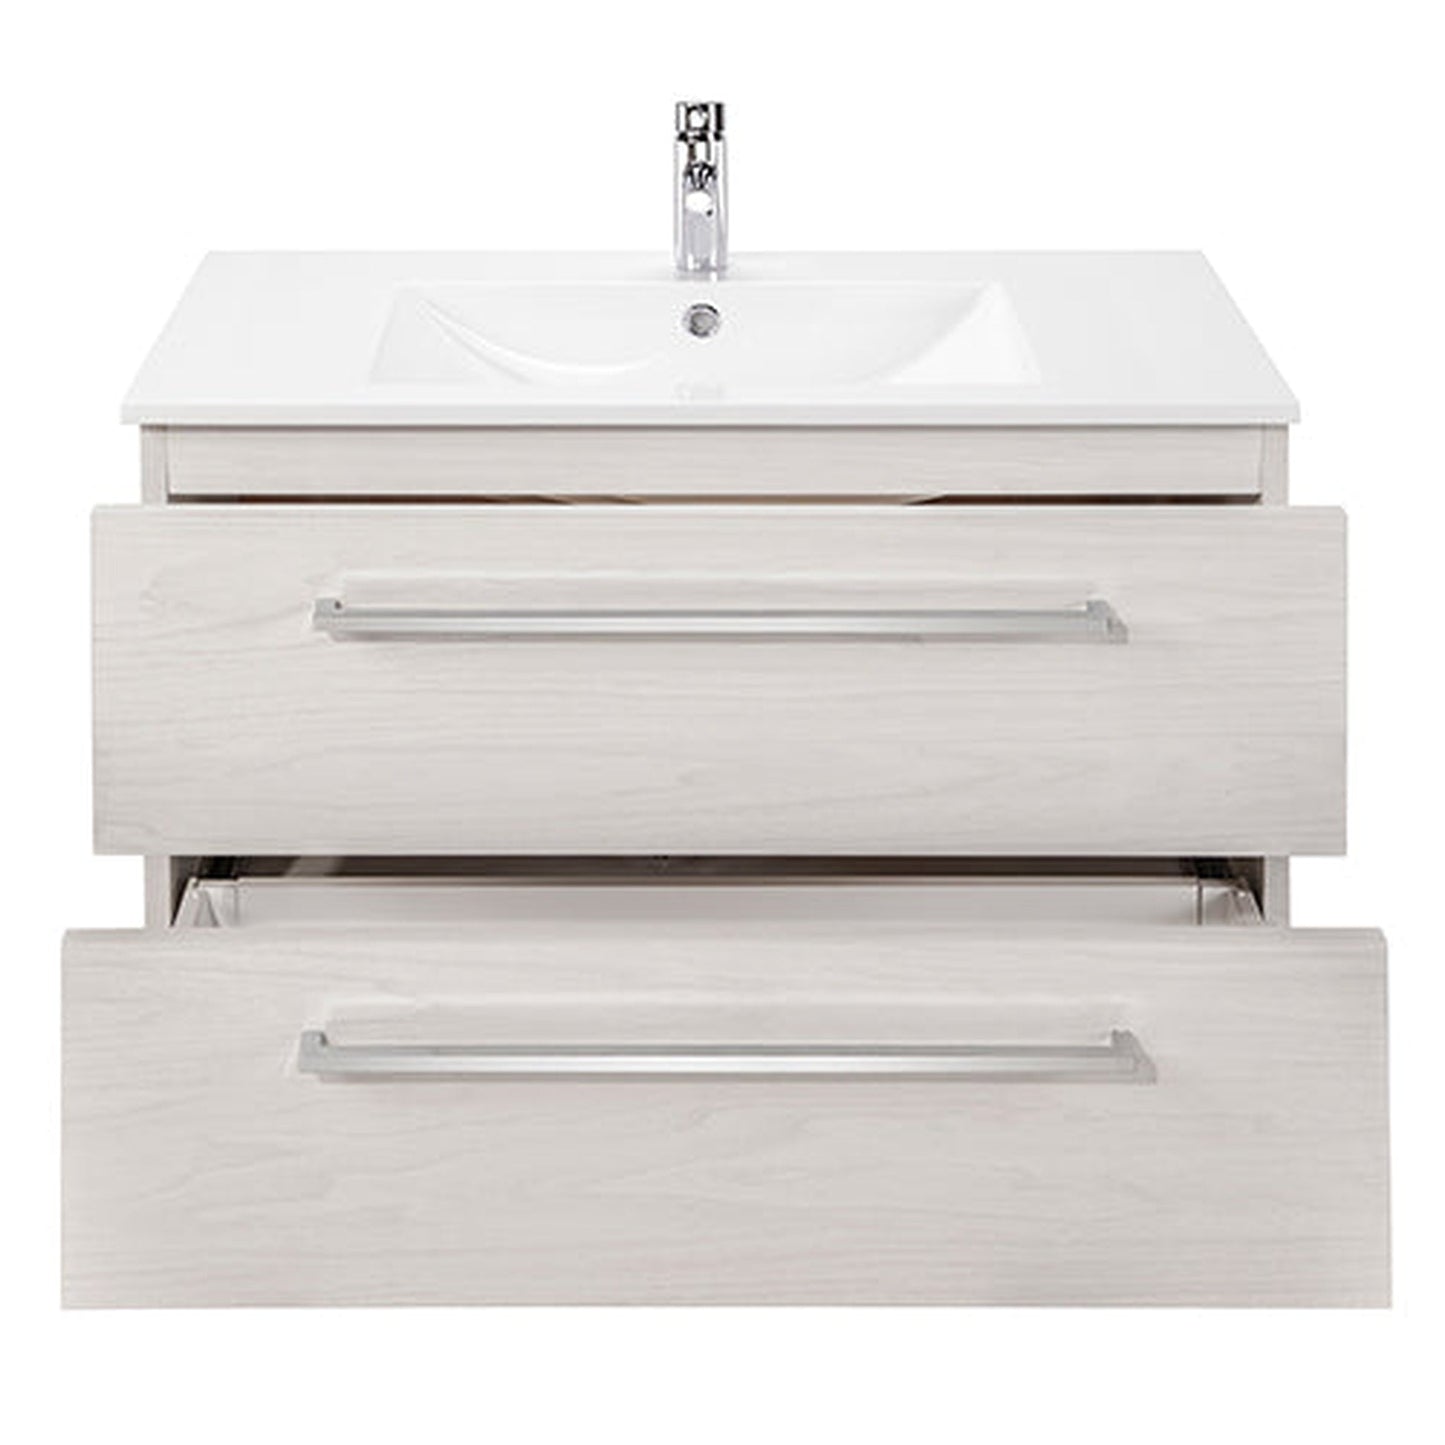 Abby Bath Aiden 36” x 20” Wall-Mounted Vanity in Winter White Finish With Two Drawers and Chrome Handles